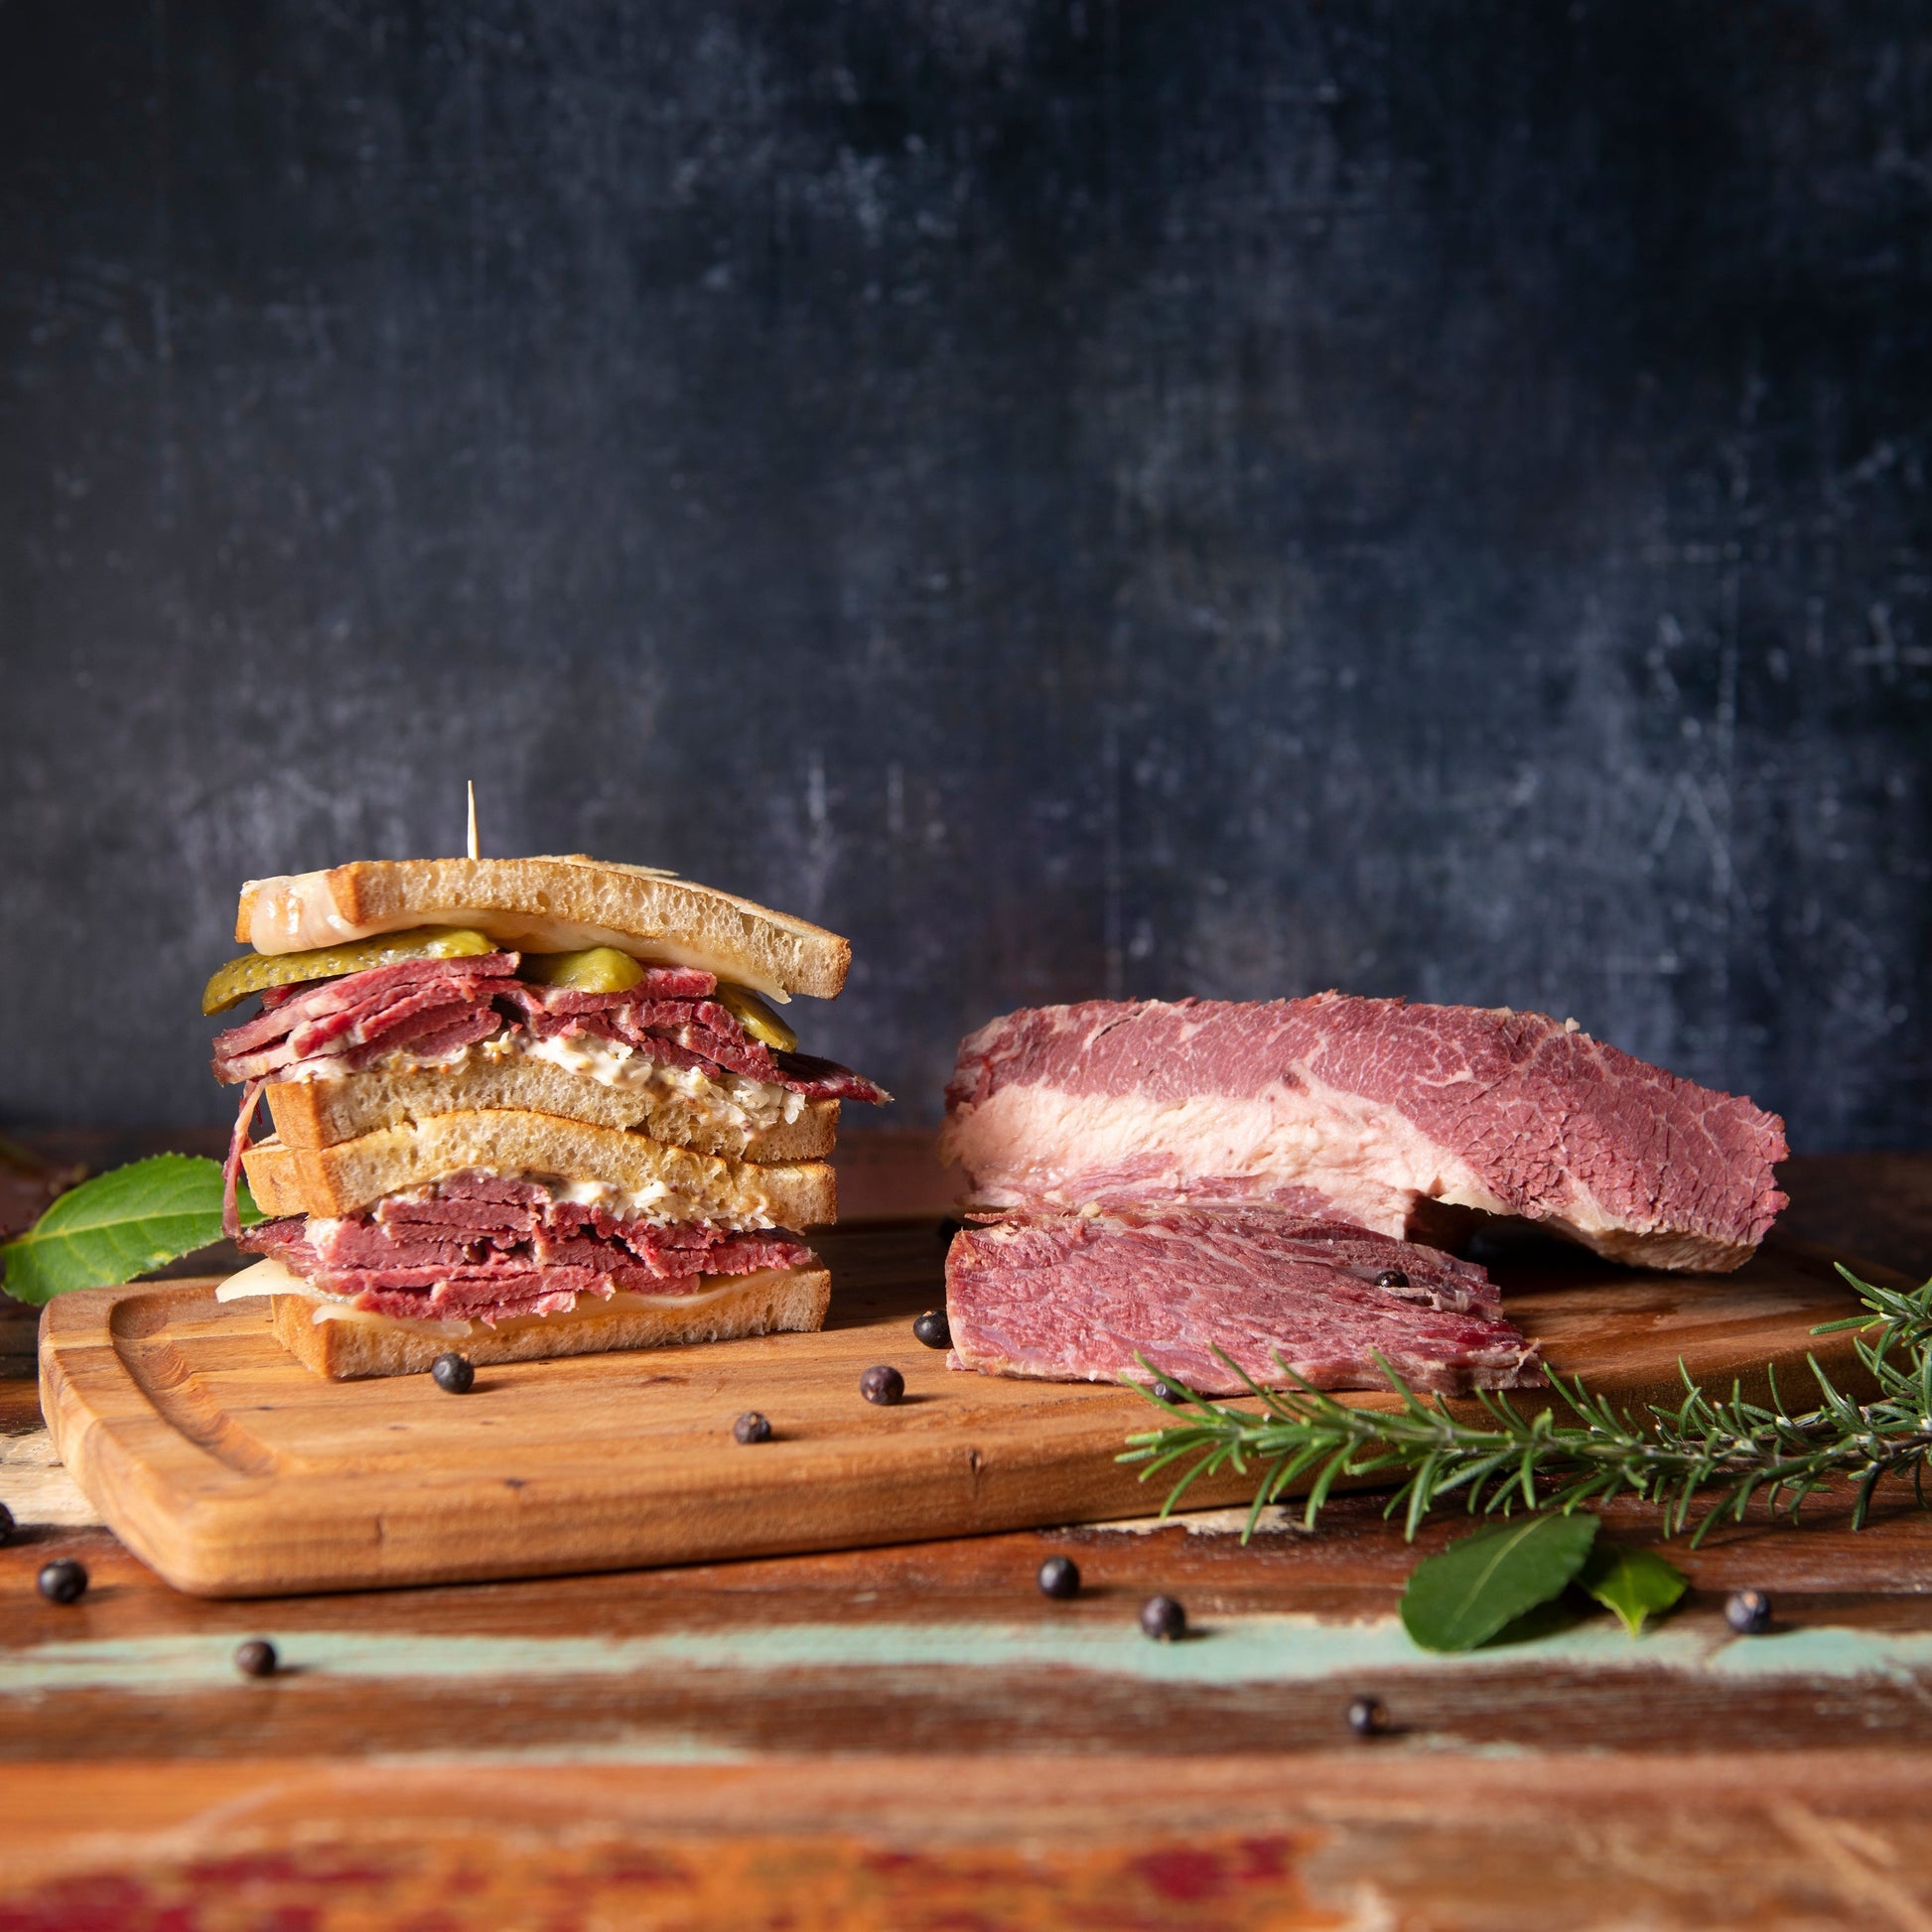 Fizz & Lily's Halal Salt Beef Brisket shown as a large ready-cooked piece and an example sandwich